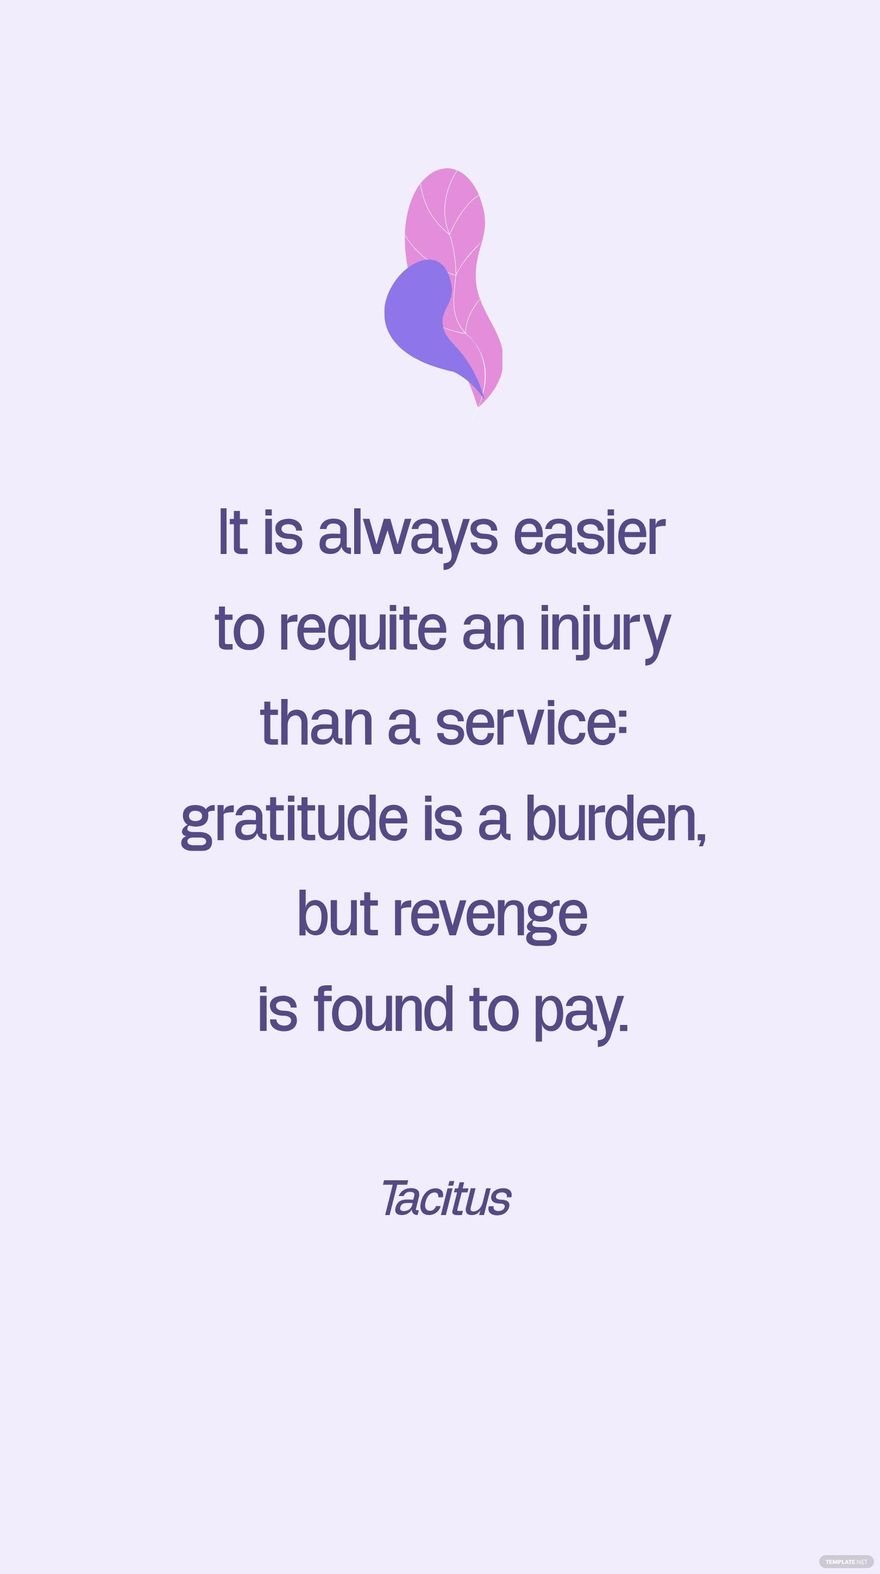 Free Tacitus - It is always easier to requite an injury than a service: gratitude is a burden, but revenge is found to pay. in JPG